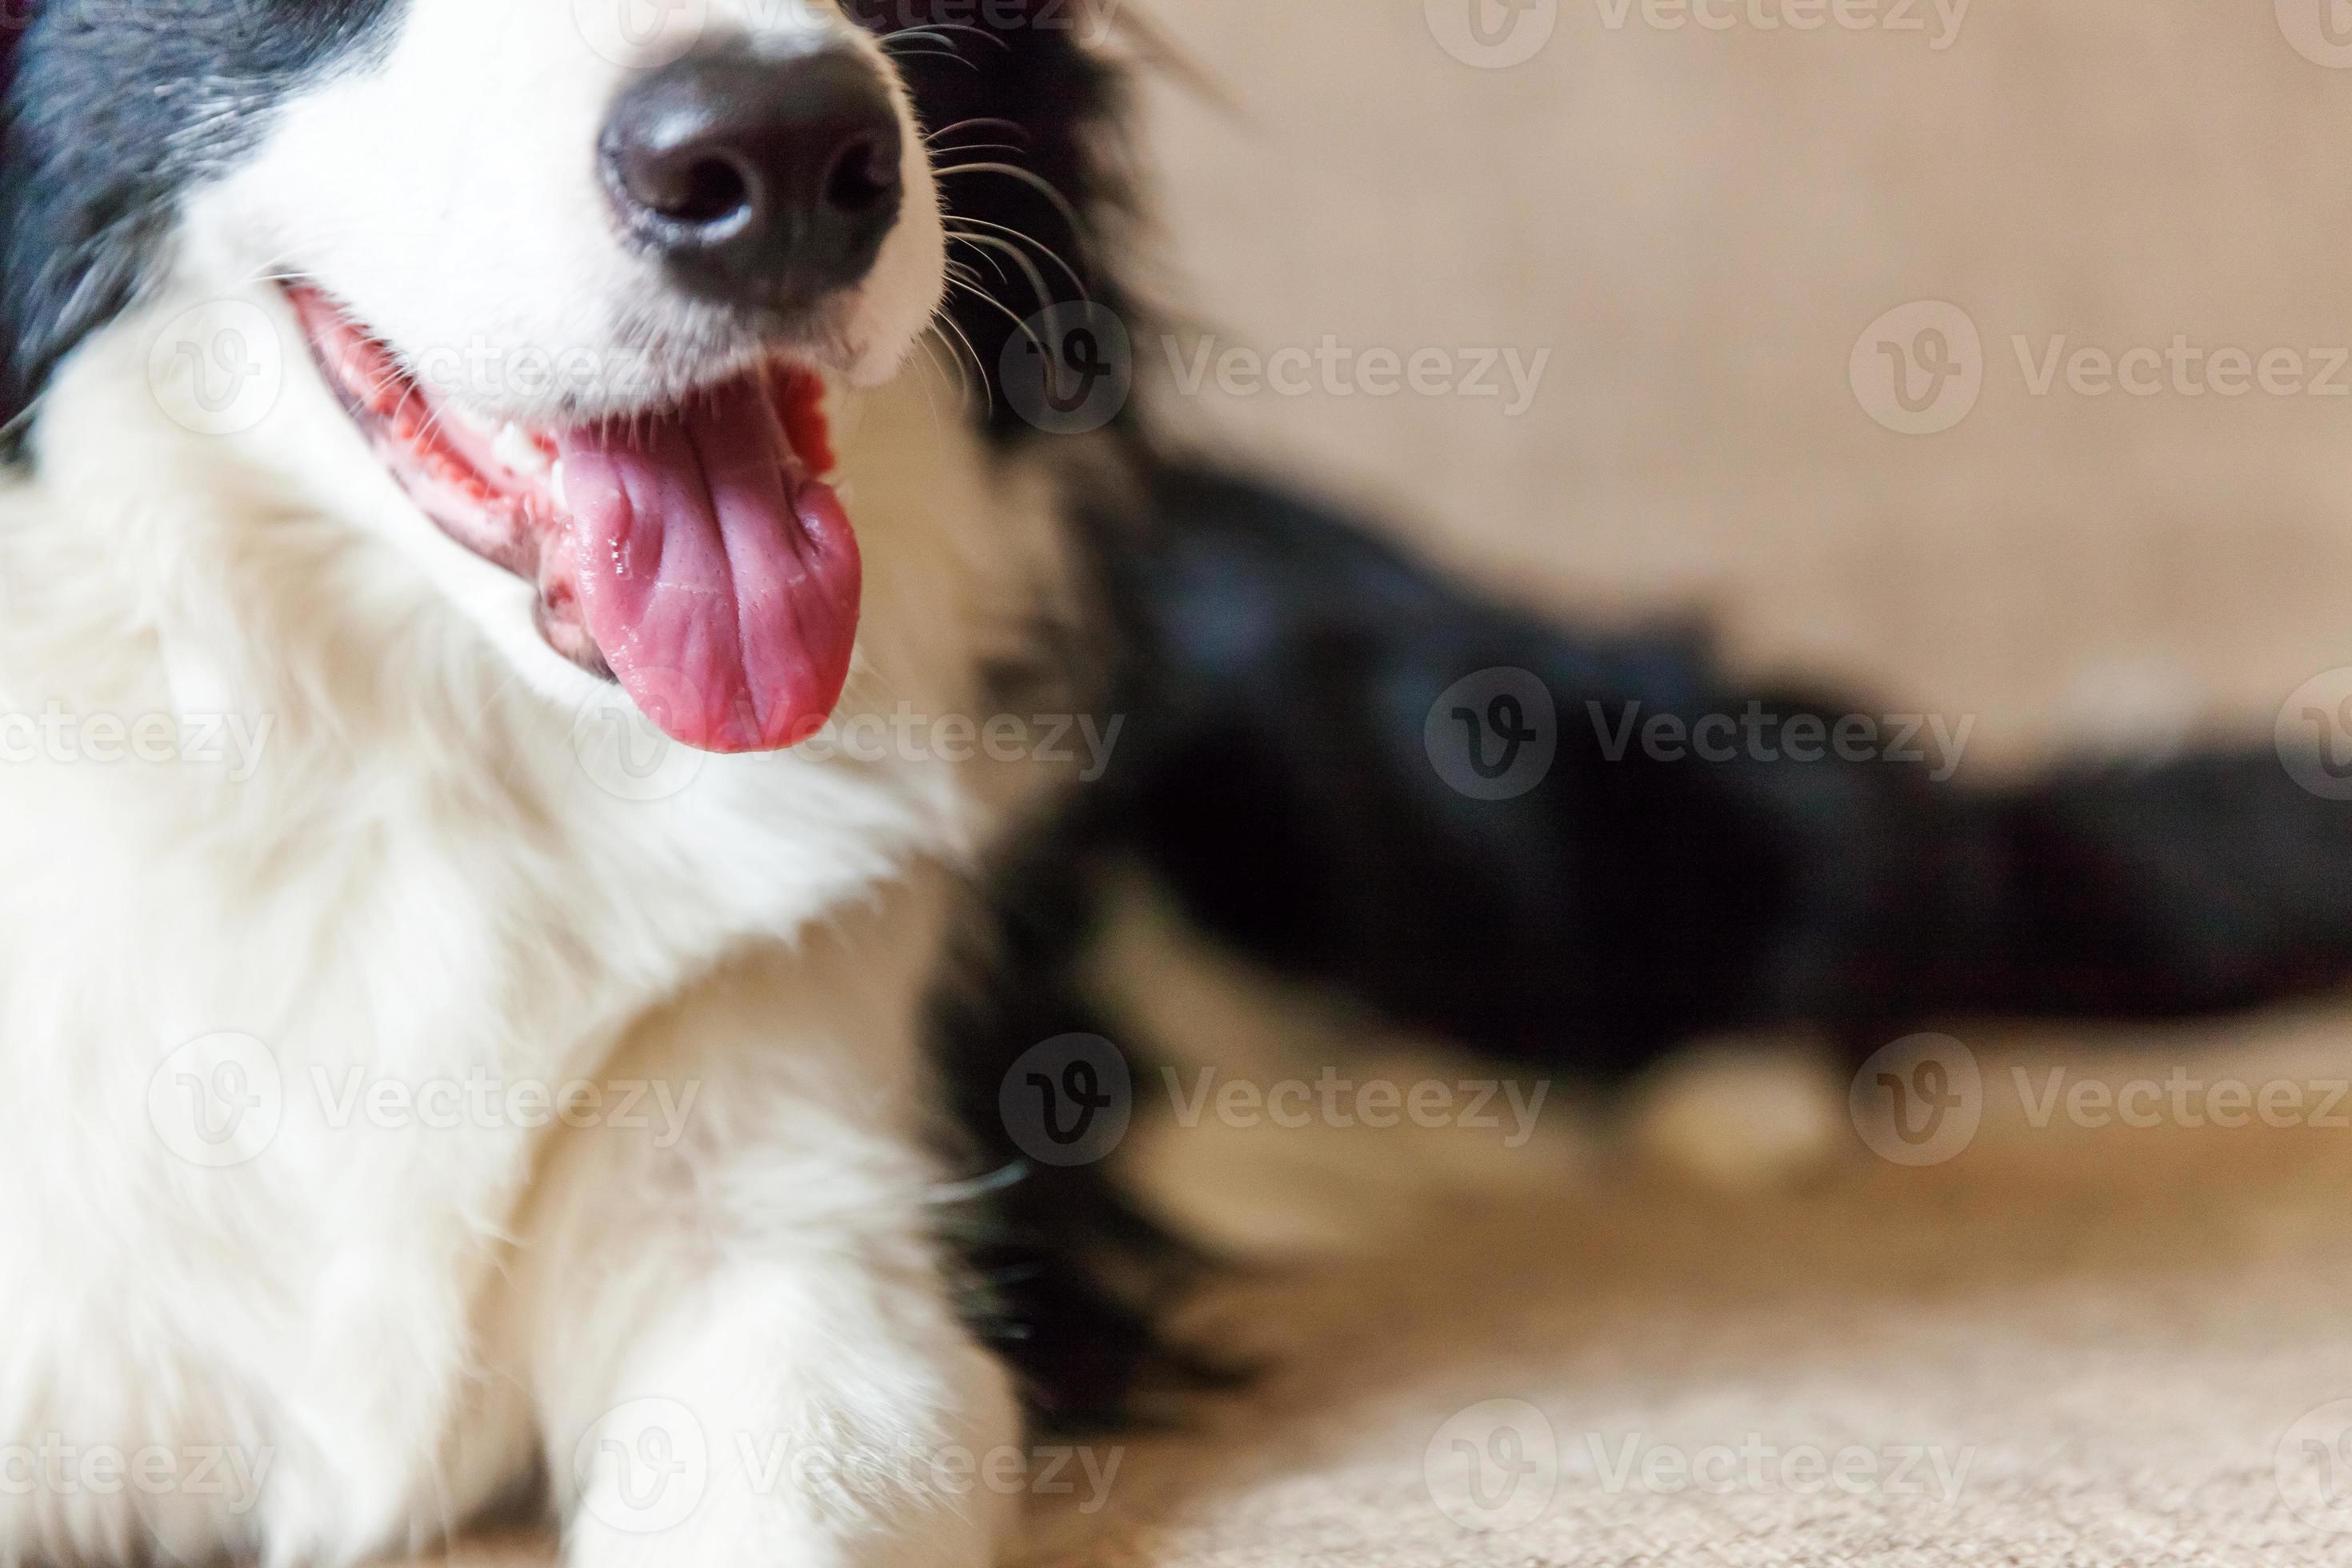 Dog nose close up. Funny portrait of cute smiling puppy dog border collie  on couch. New lovely member of family little dog at home gazing and  waiting. Pet care and animals concept.